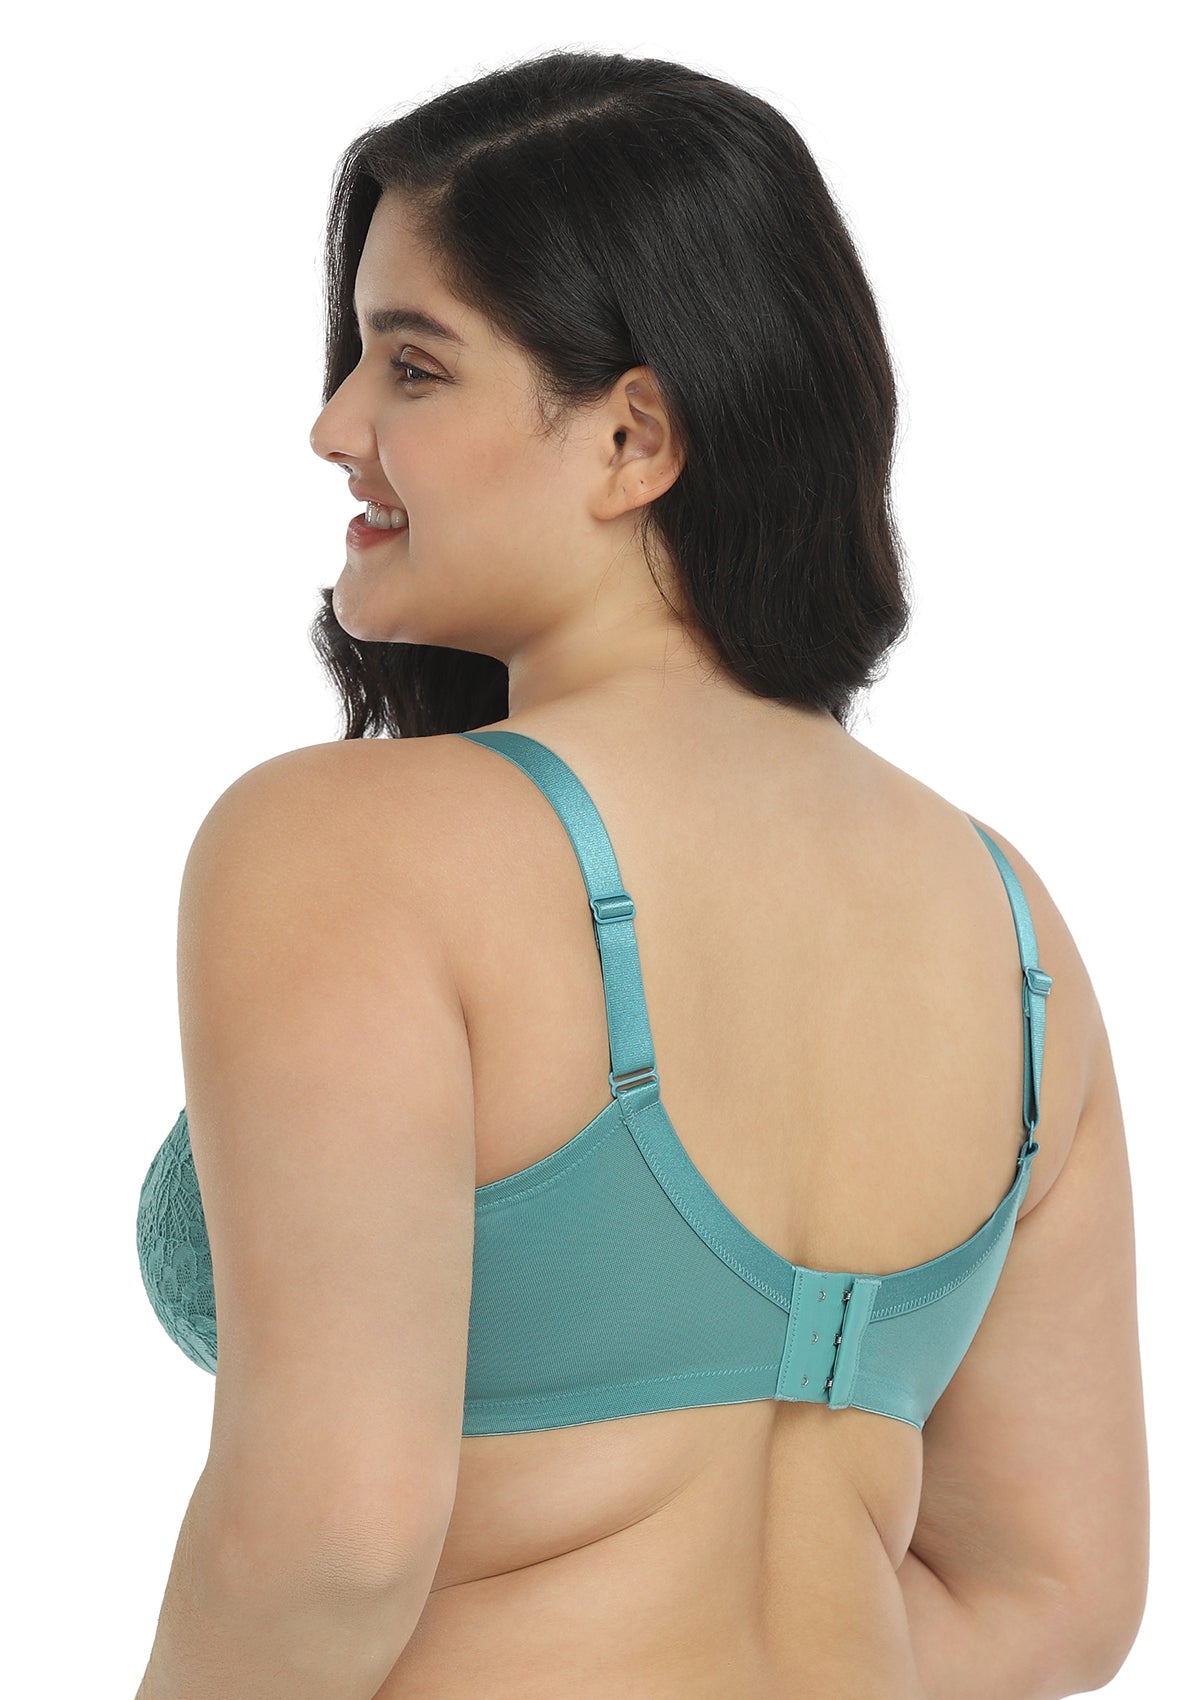 HSIA Paeonia Lace Full Coverage Underwire Non-Padded Uplifting Bra - Teal / 36 / DD/E